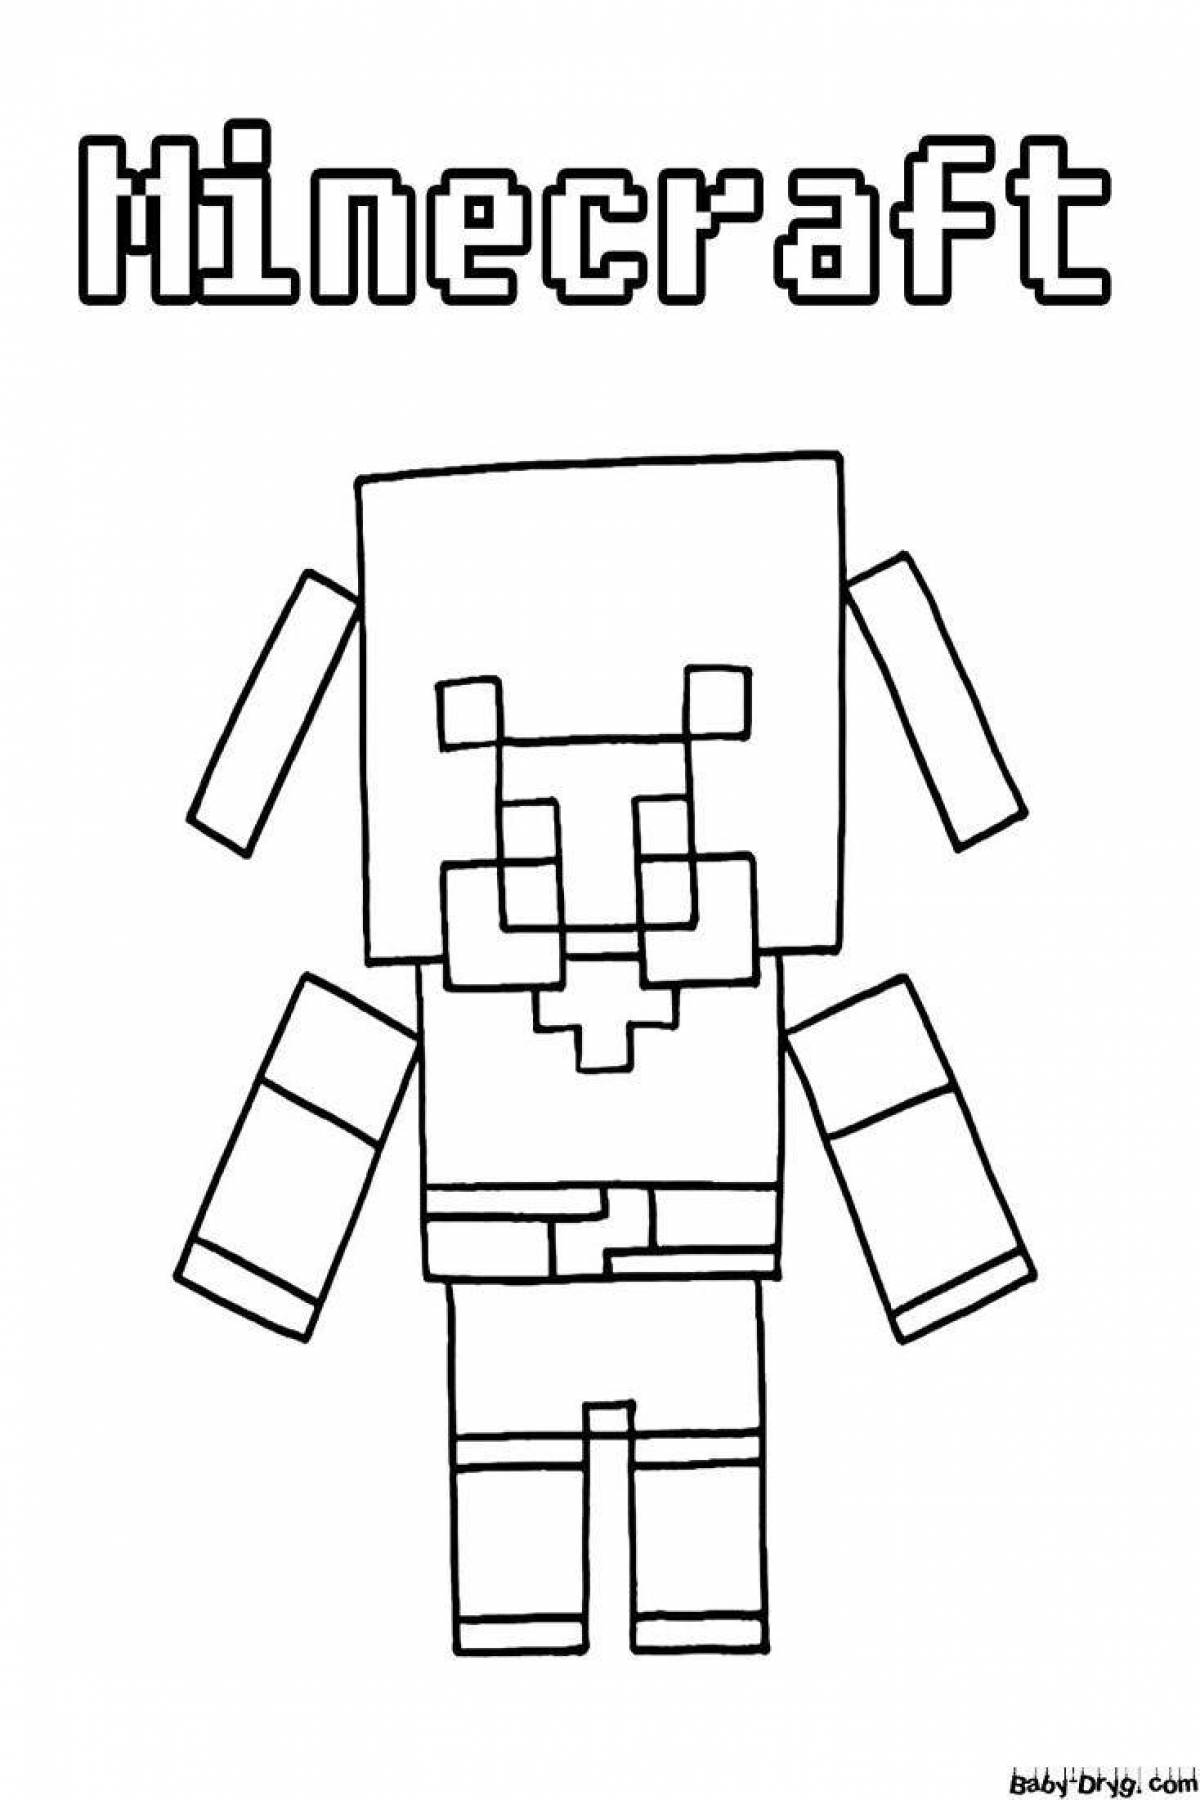 Awesome minecraft shulker coloring page